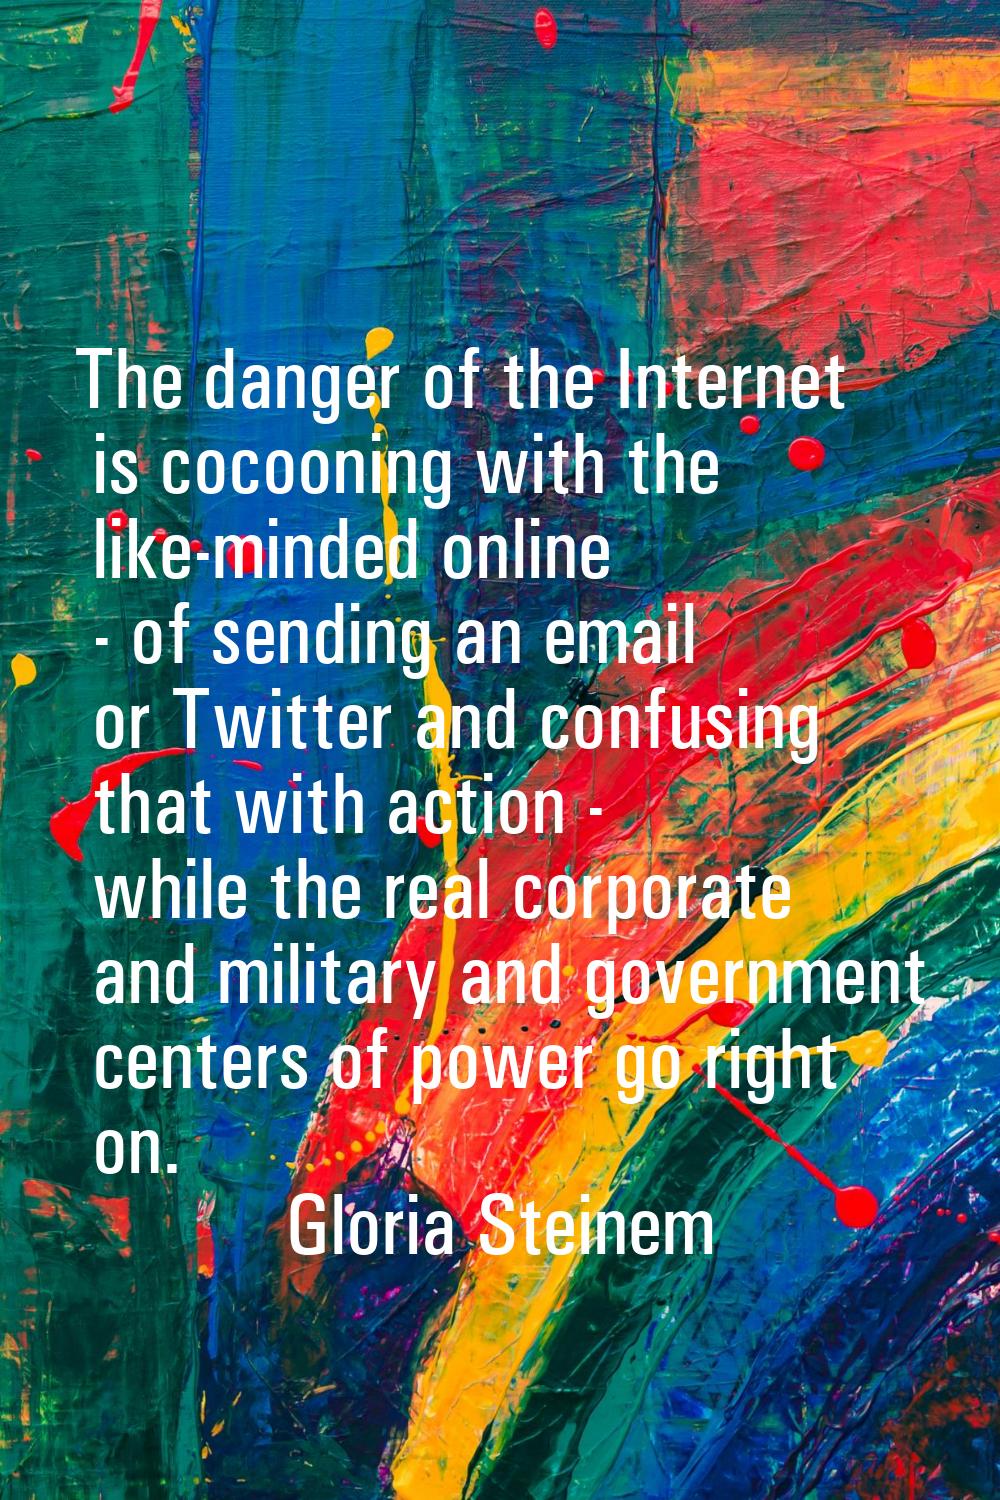 The danger of the Internet is cocooning with the like-minded online - of sending an email or Twitte